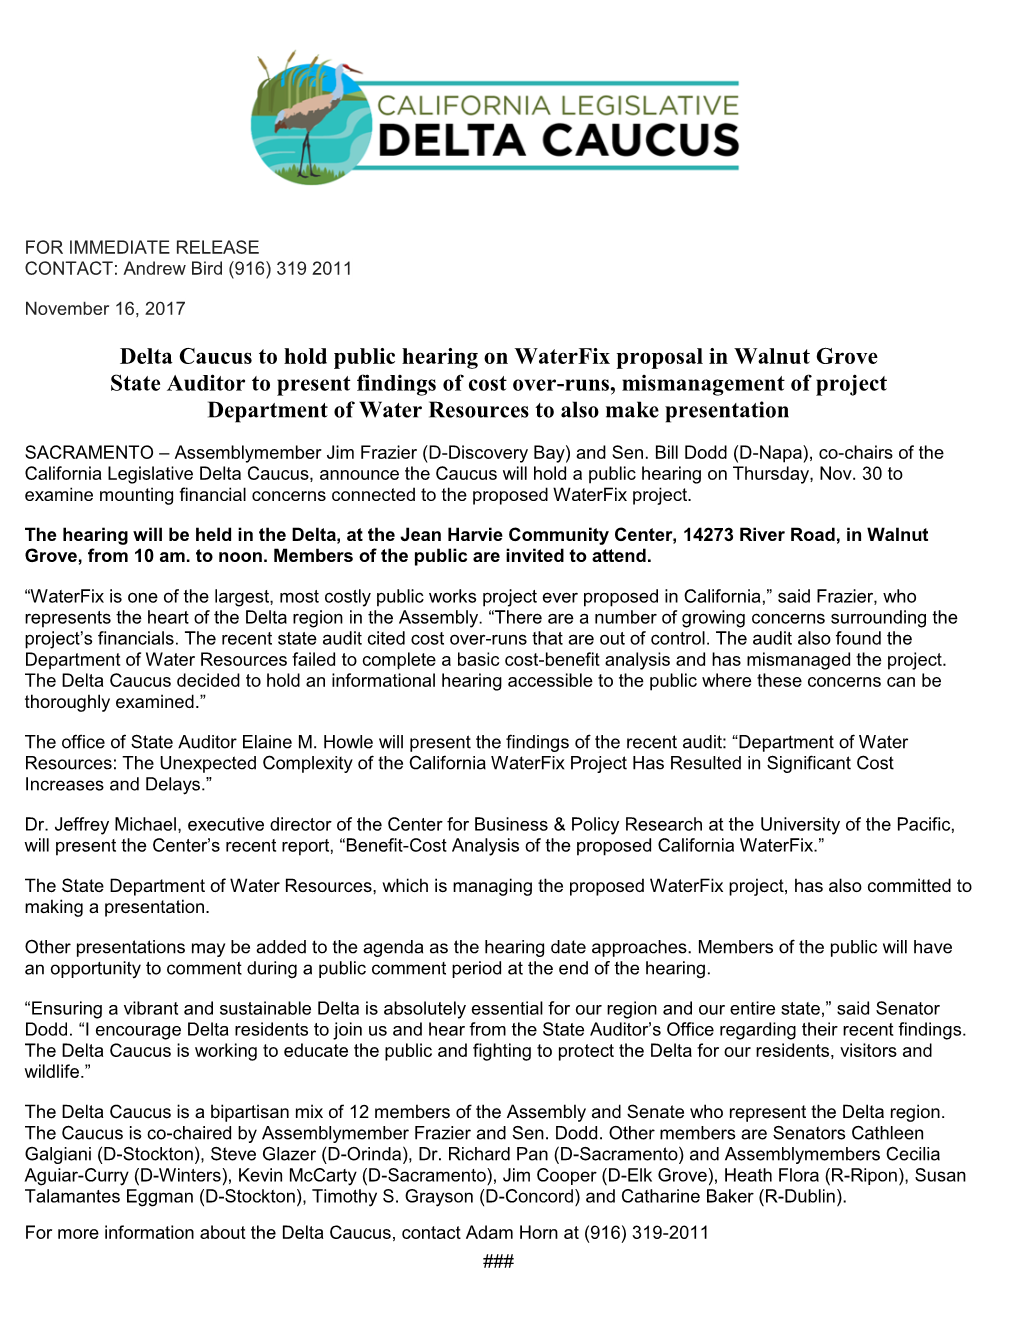 Delta Caucus to Hold Public Hearing on Waterfix Proposal in Walnut Grove State Auditor to Present Findings of Cost Over-Runs, Mi